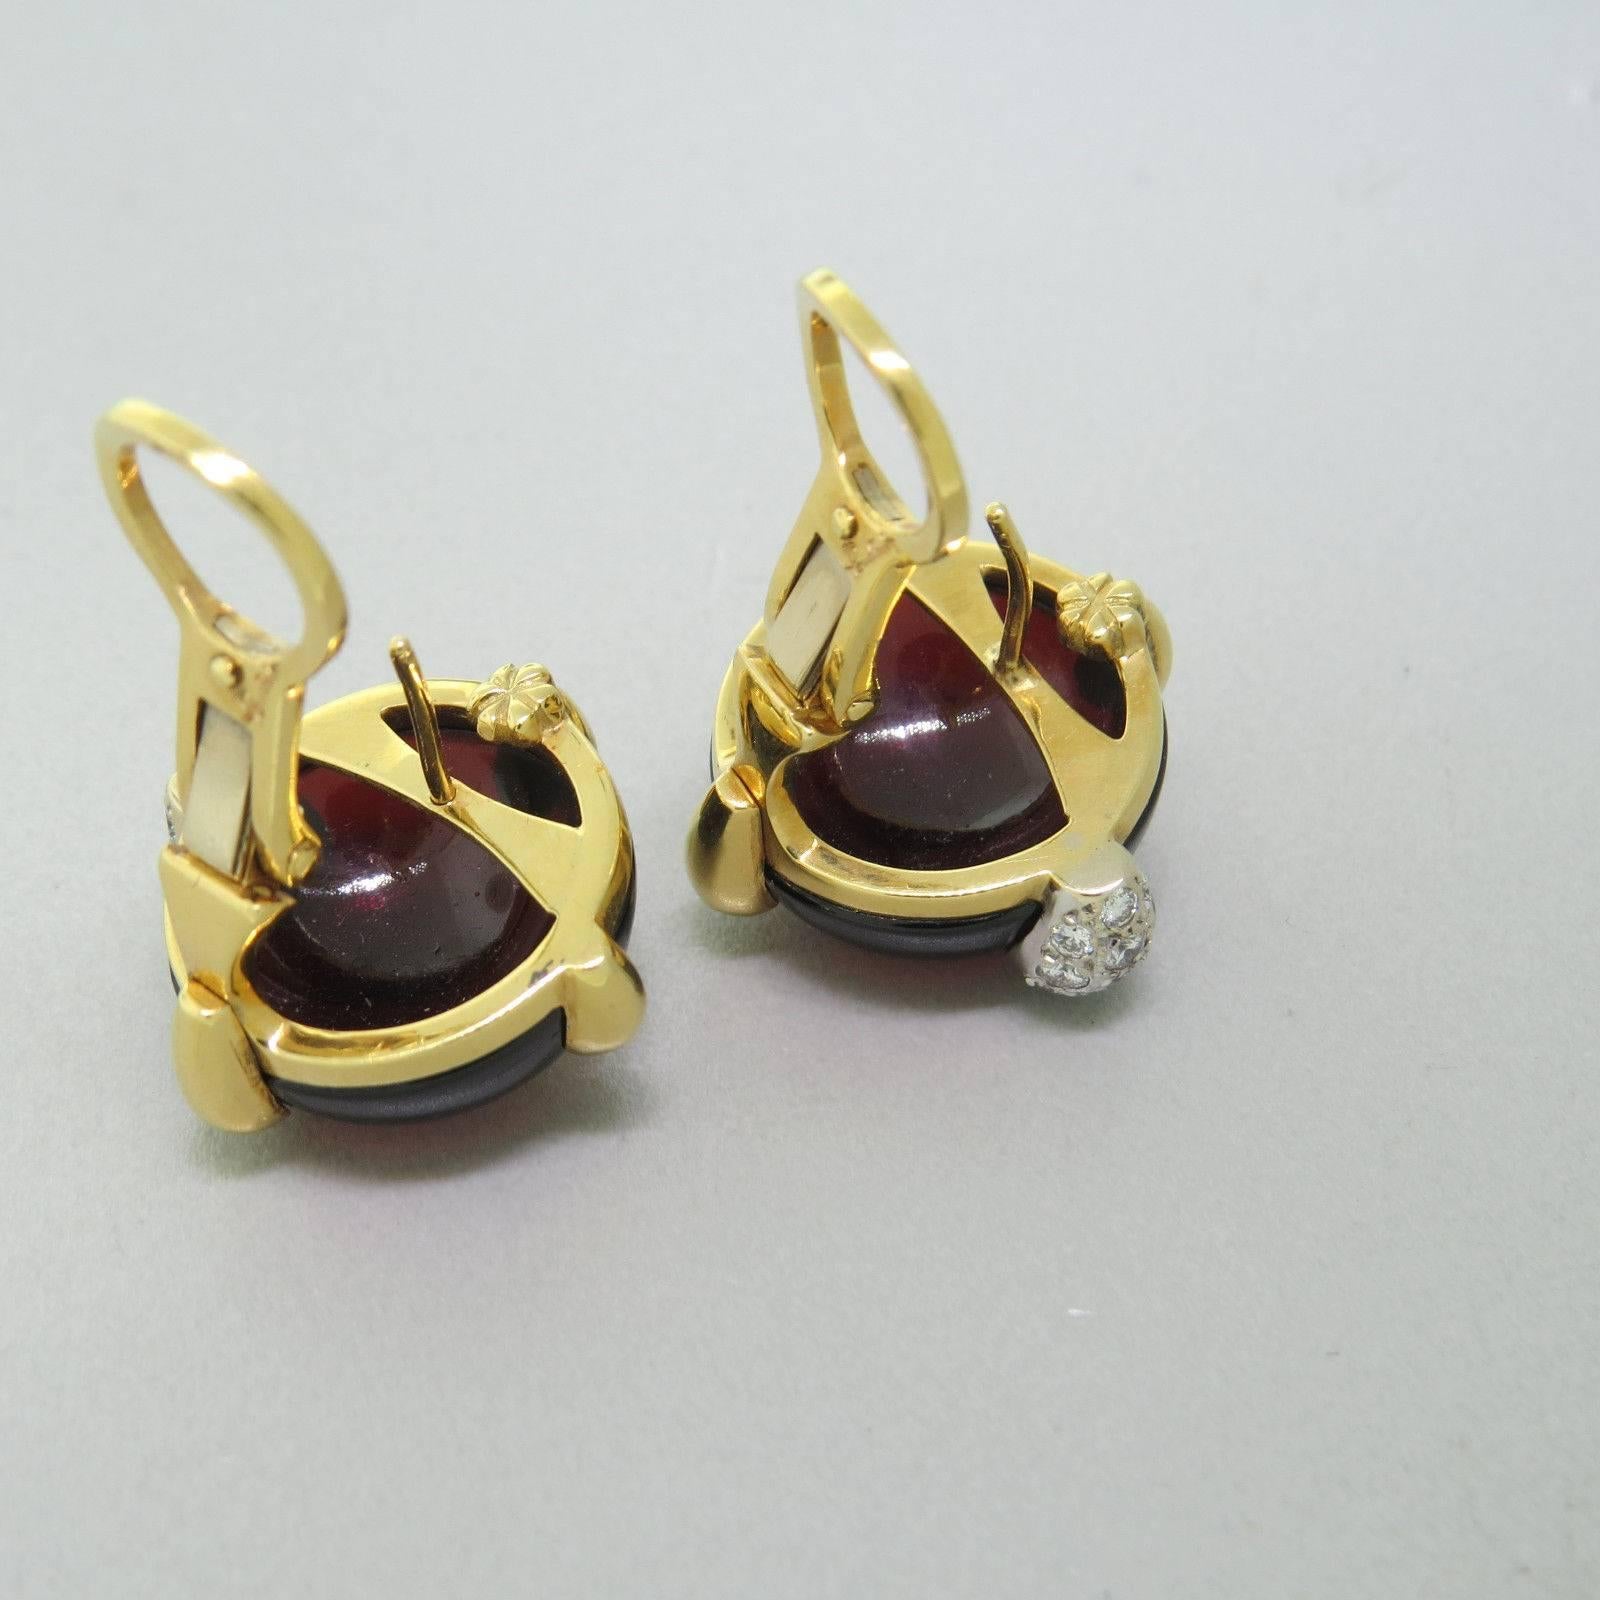 A pair of 18k gold cabochon earrings. Crafted by Pomellato featuring approximately 0.40ctw in G/VS diamonds and garnet. Earrings-21mm x 23mm. Marked 750, Pomellato. Weight- 21.3 grams.